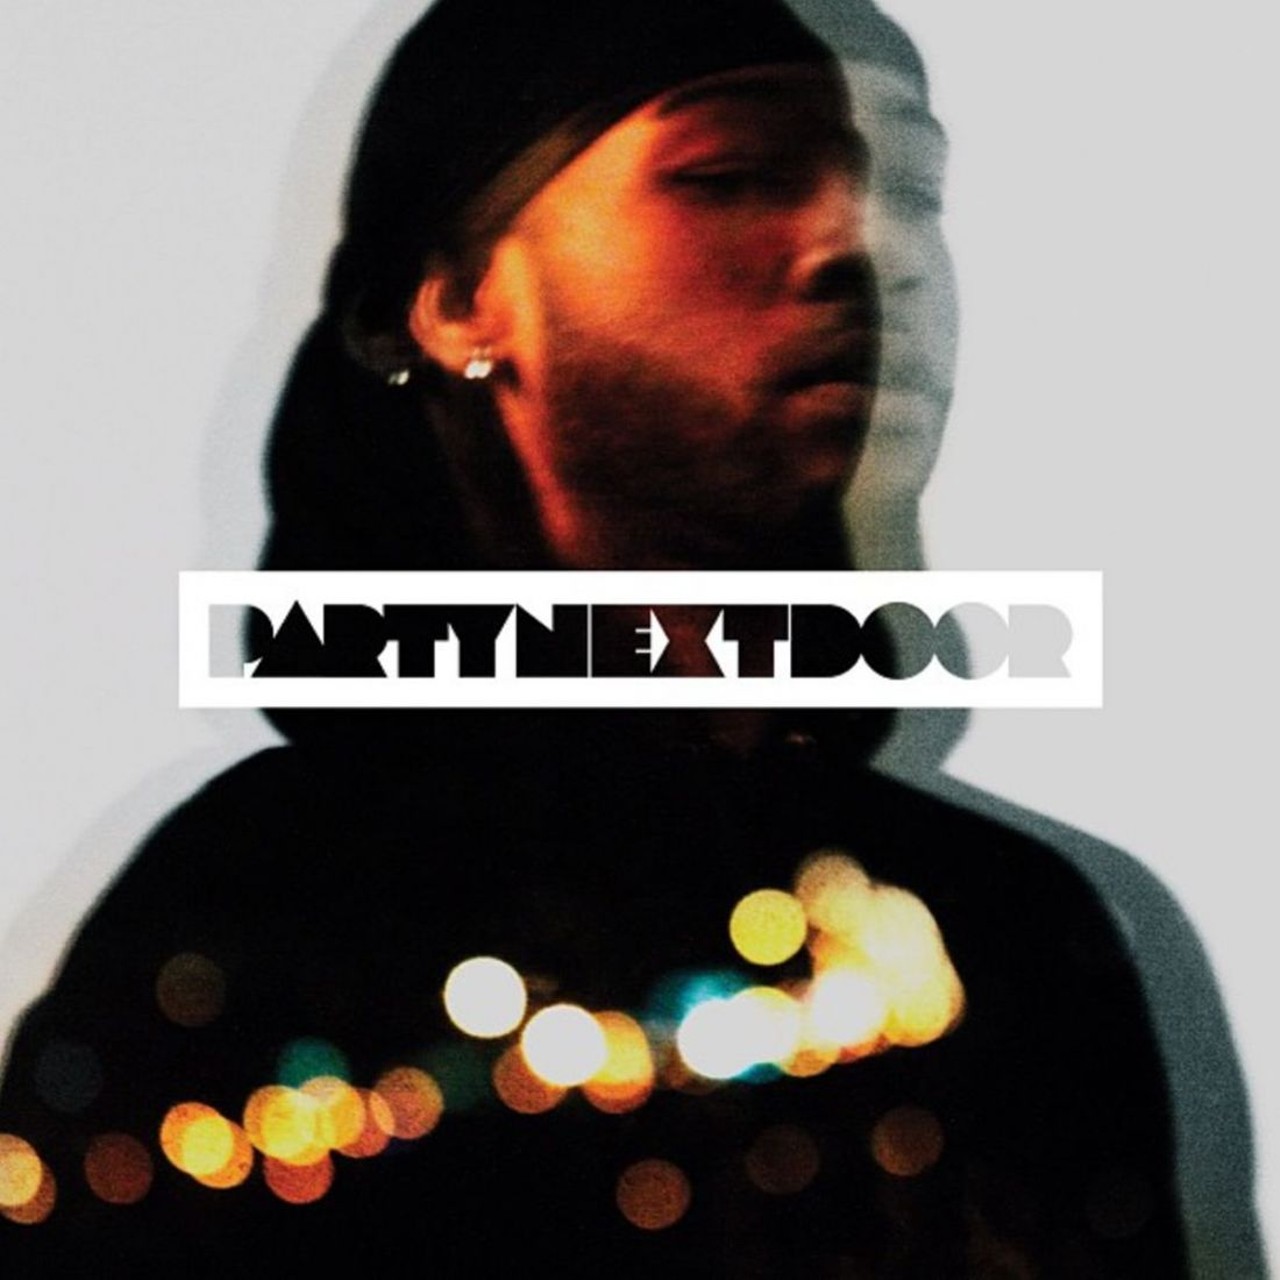  "Cleveland Ohio," by PARTYNEXTDOOR 
The origins of this one-minute track from the Canadian rapper are unclear. Perhaps it's about a fling he had with a girl in Cleveland singing, "She the one that I check, and the girl that I hit/Every time that I hit the O-Town."     
Photo via partynextdoor/Instagram